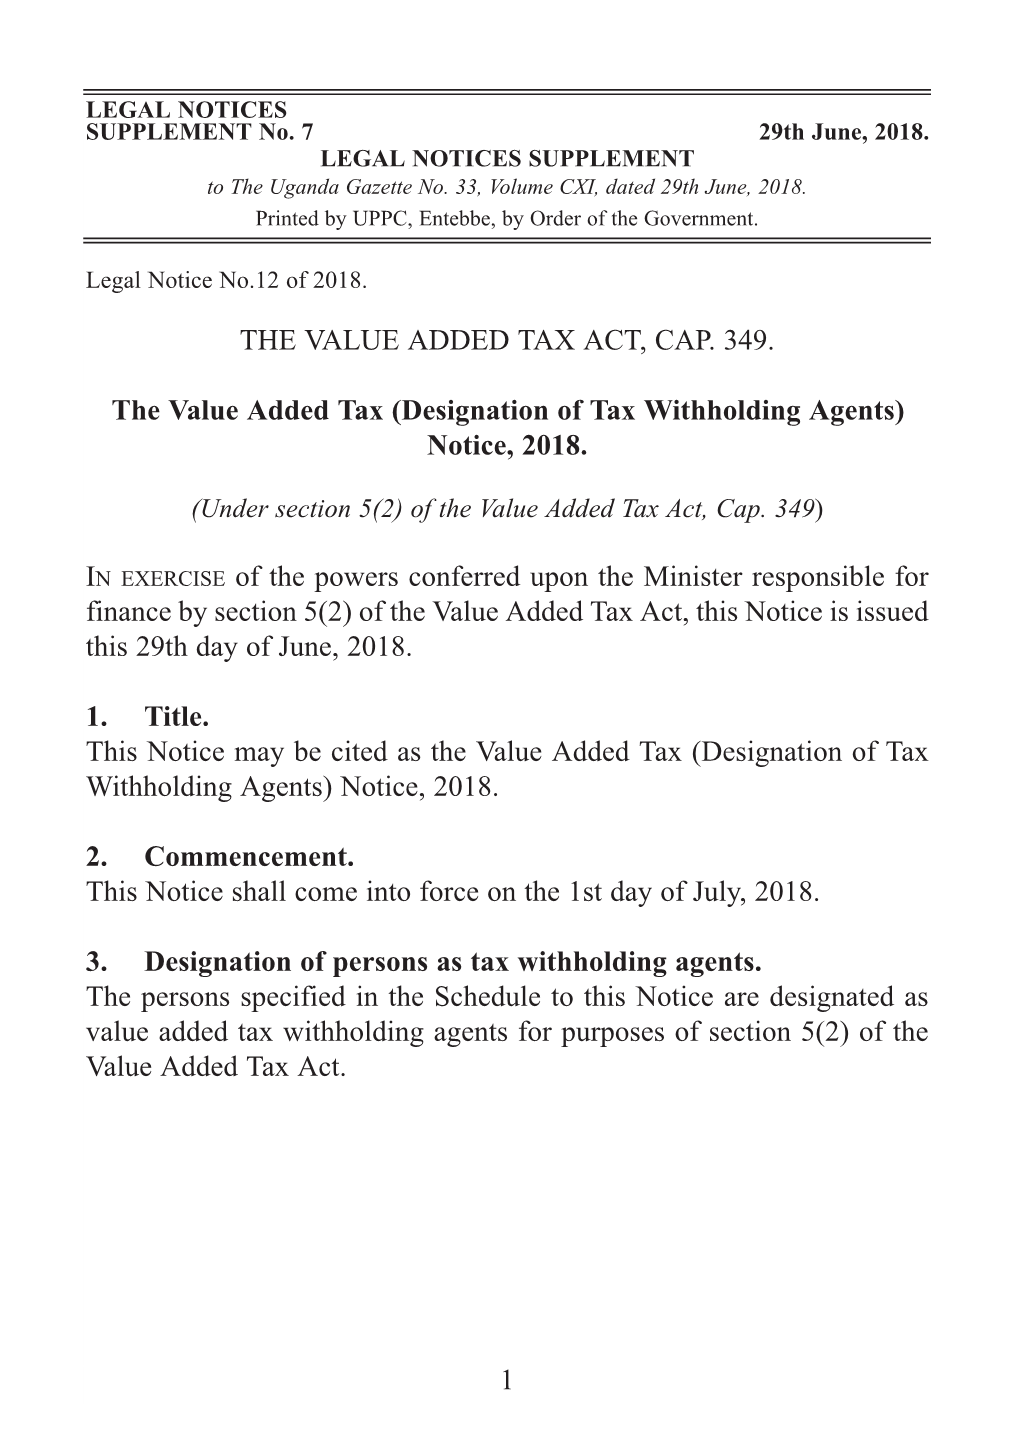 Designation of Tax Withholding Agents) Notice, 2018